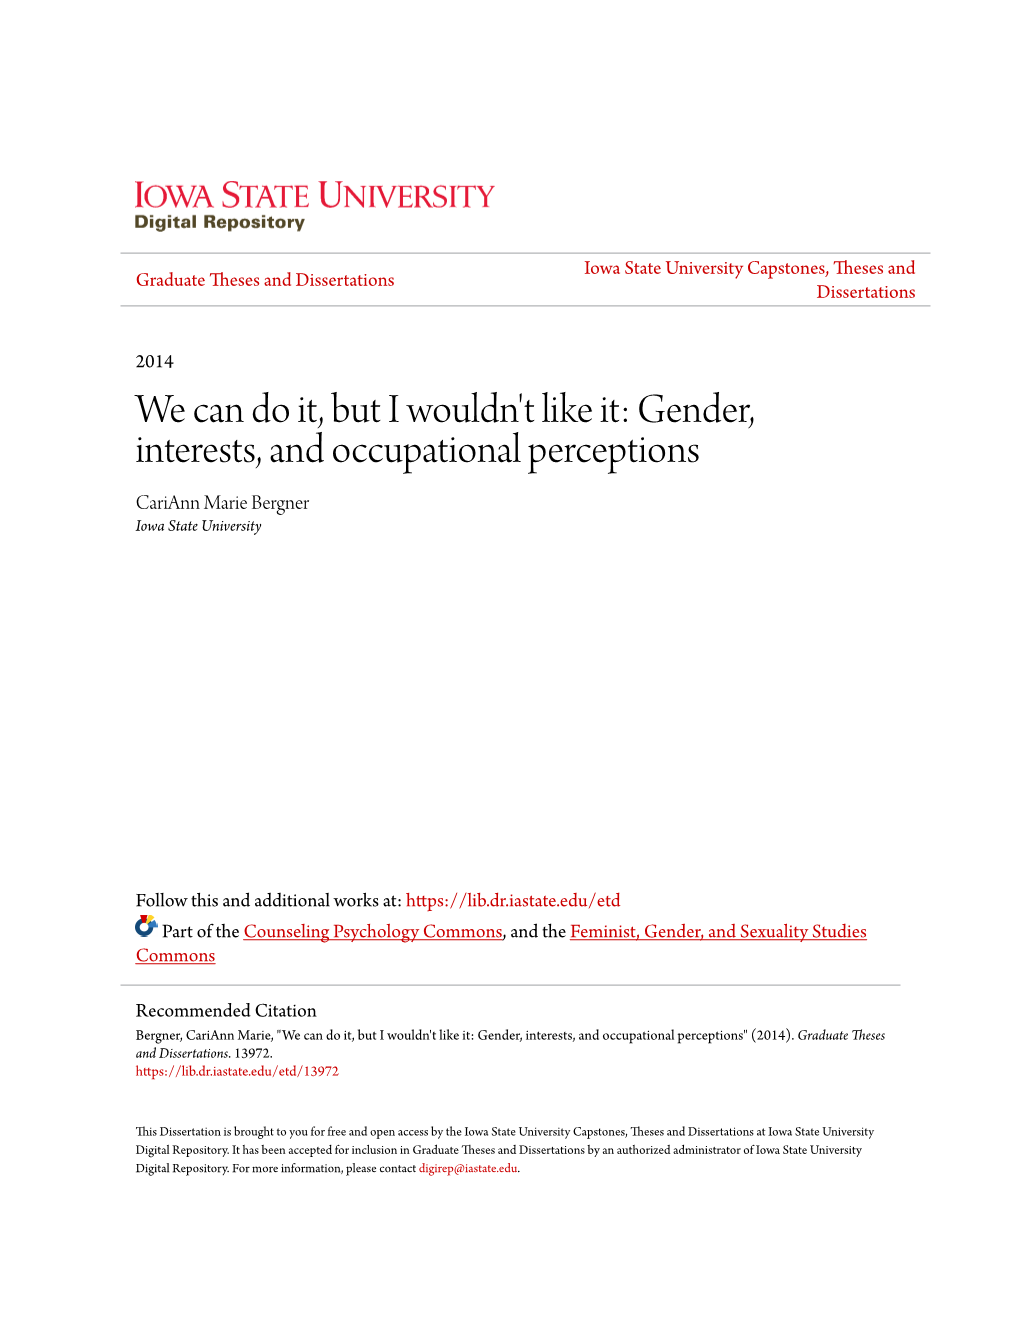 Gender, Interests, and Occupational Perceptions Cariann Marie Bergner Iowa State University